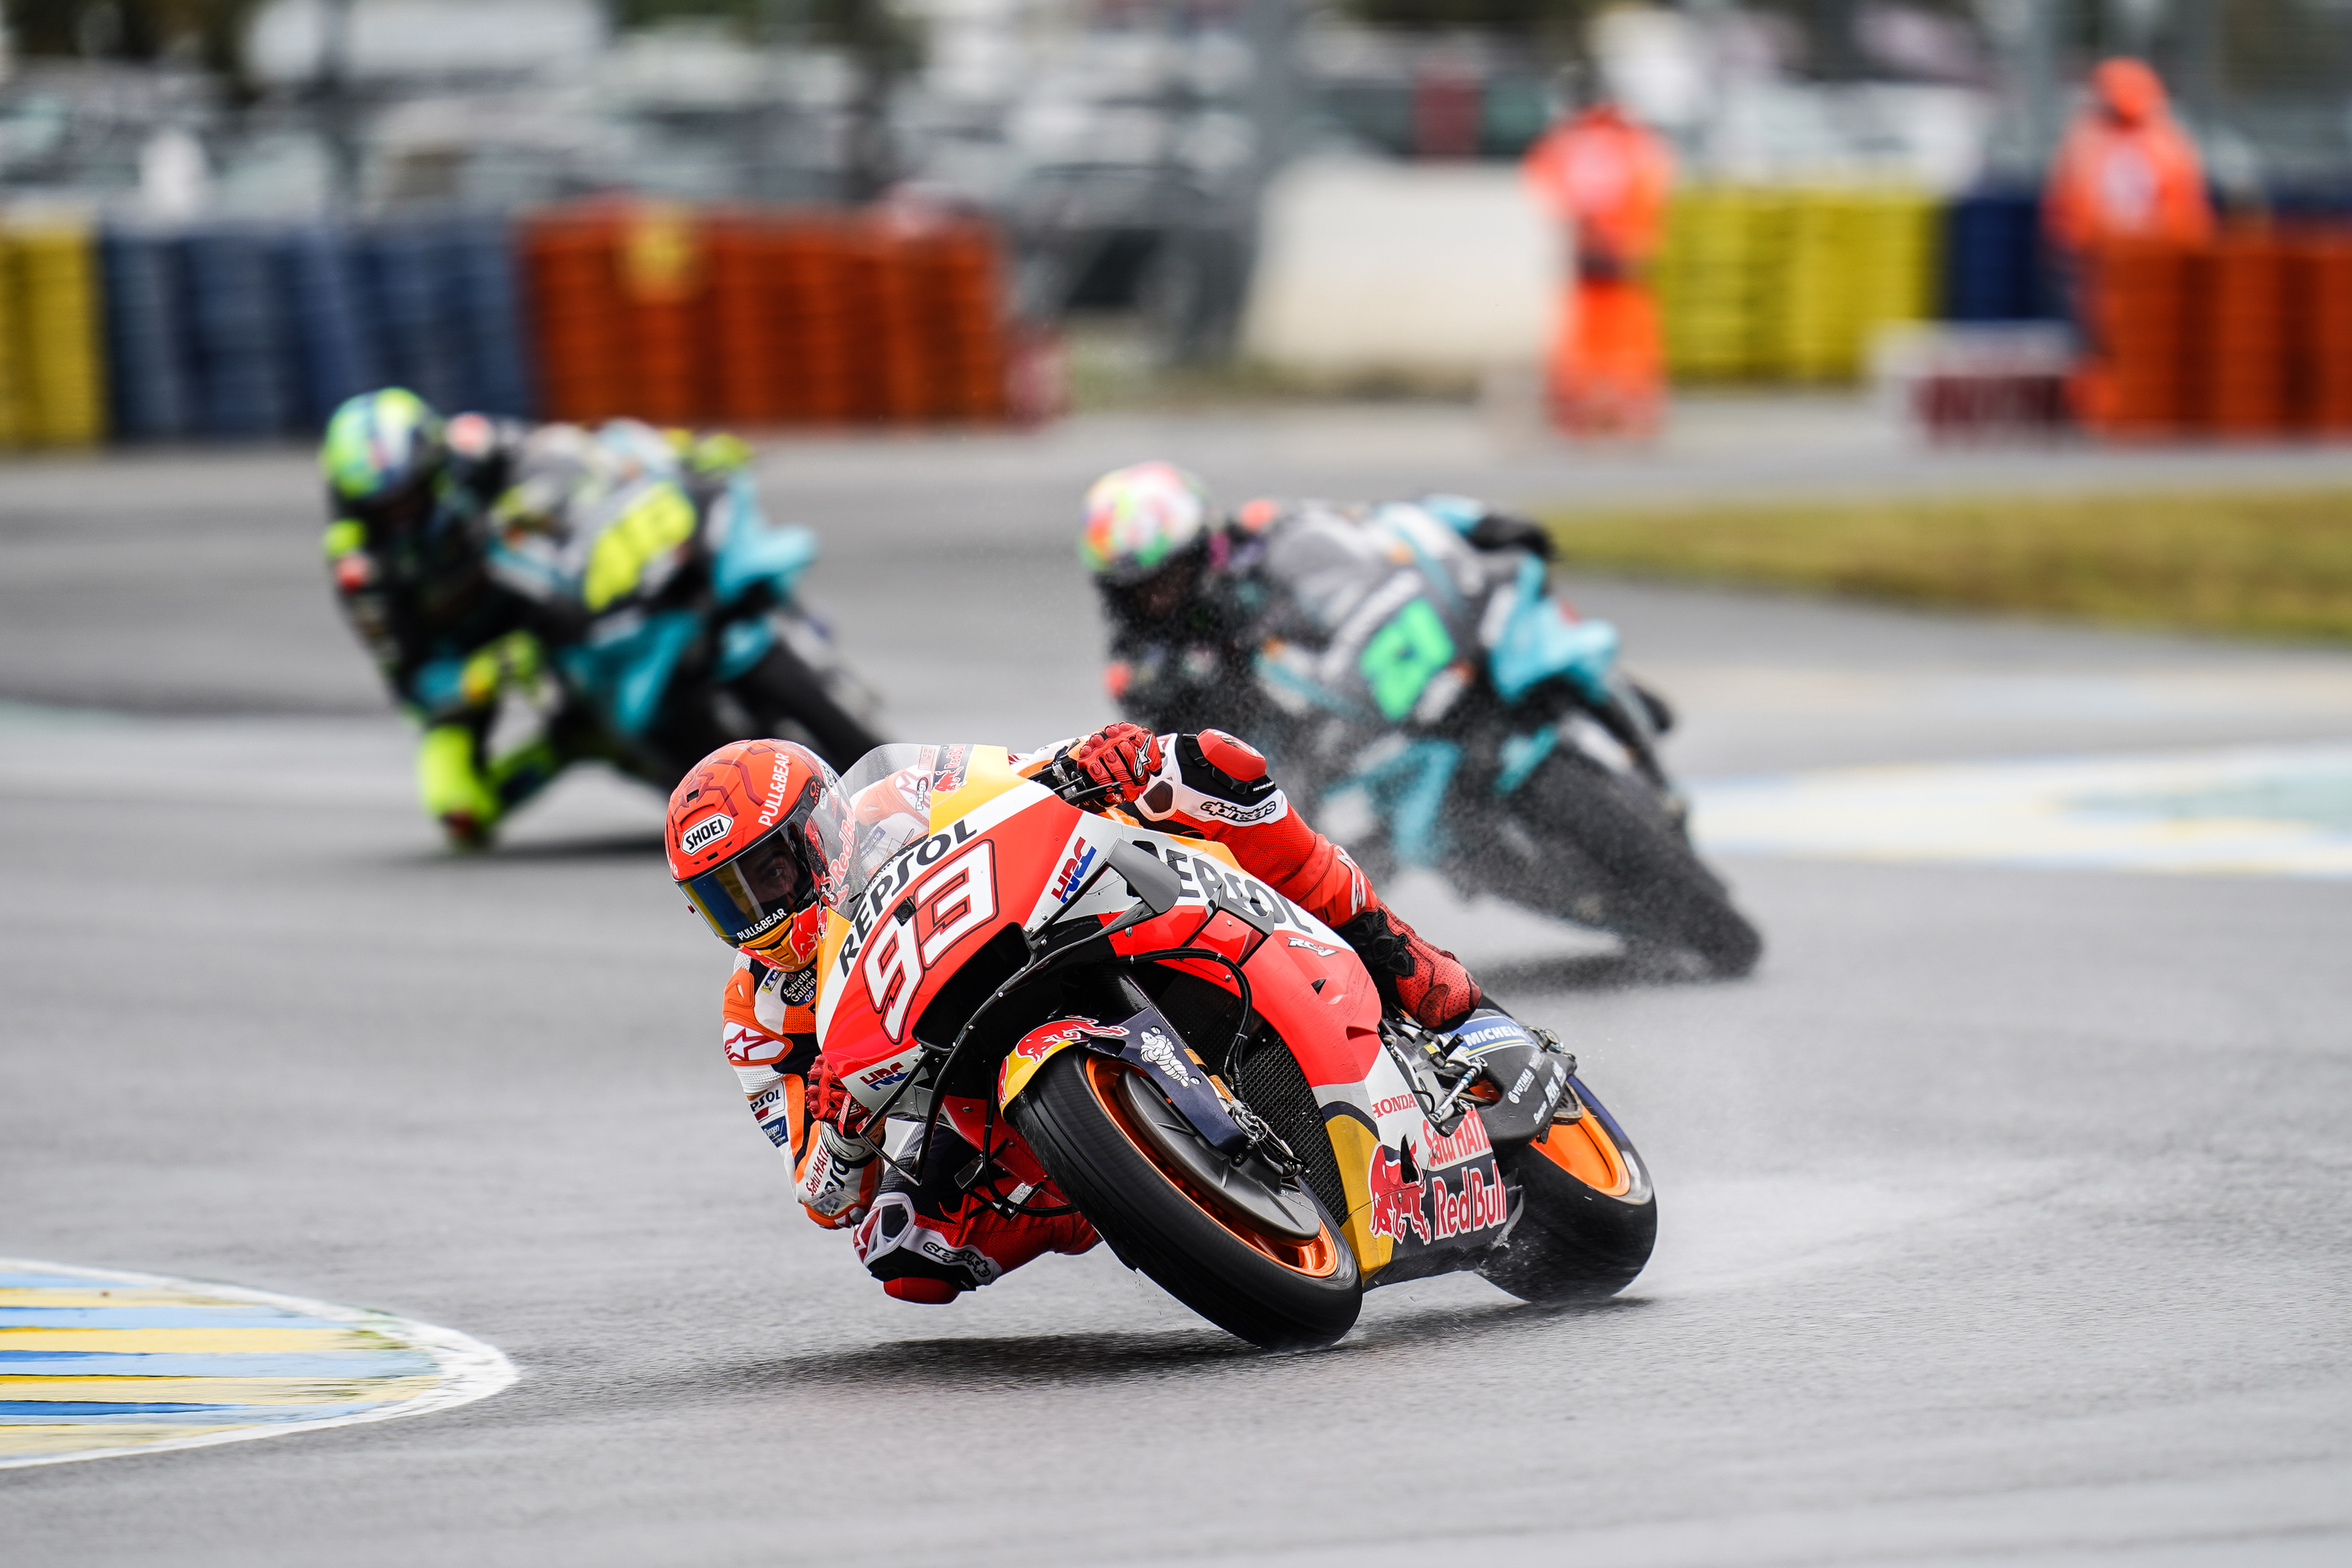 Marquez returns to the battle for victory as Espargaro salvages eighth in dramatic 2021 French GP decoding=